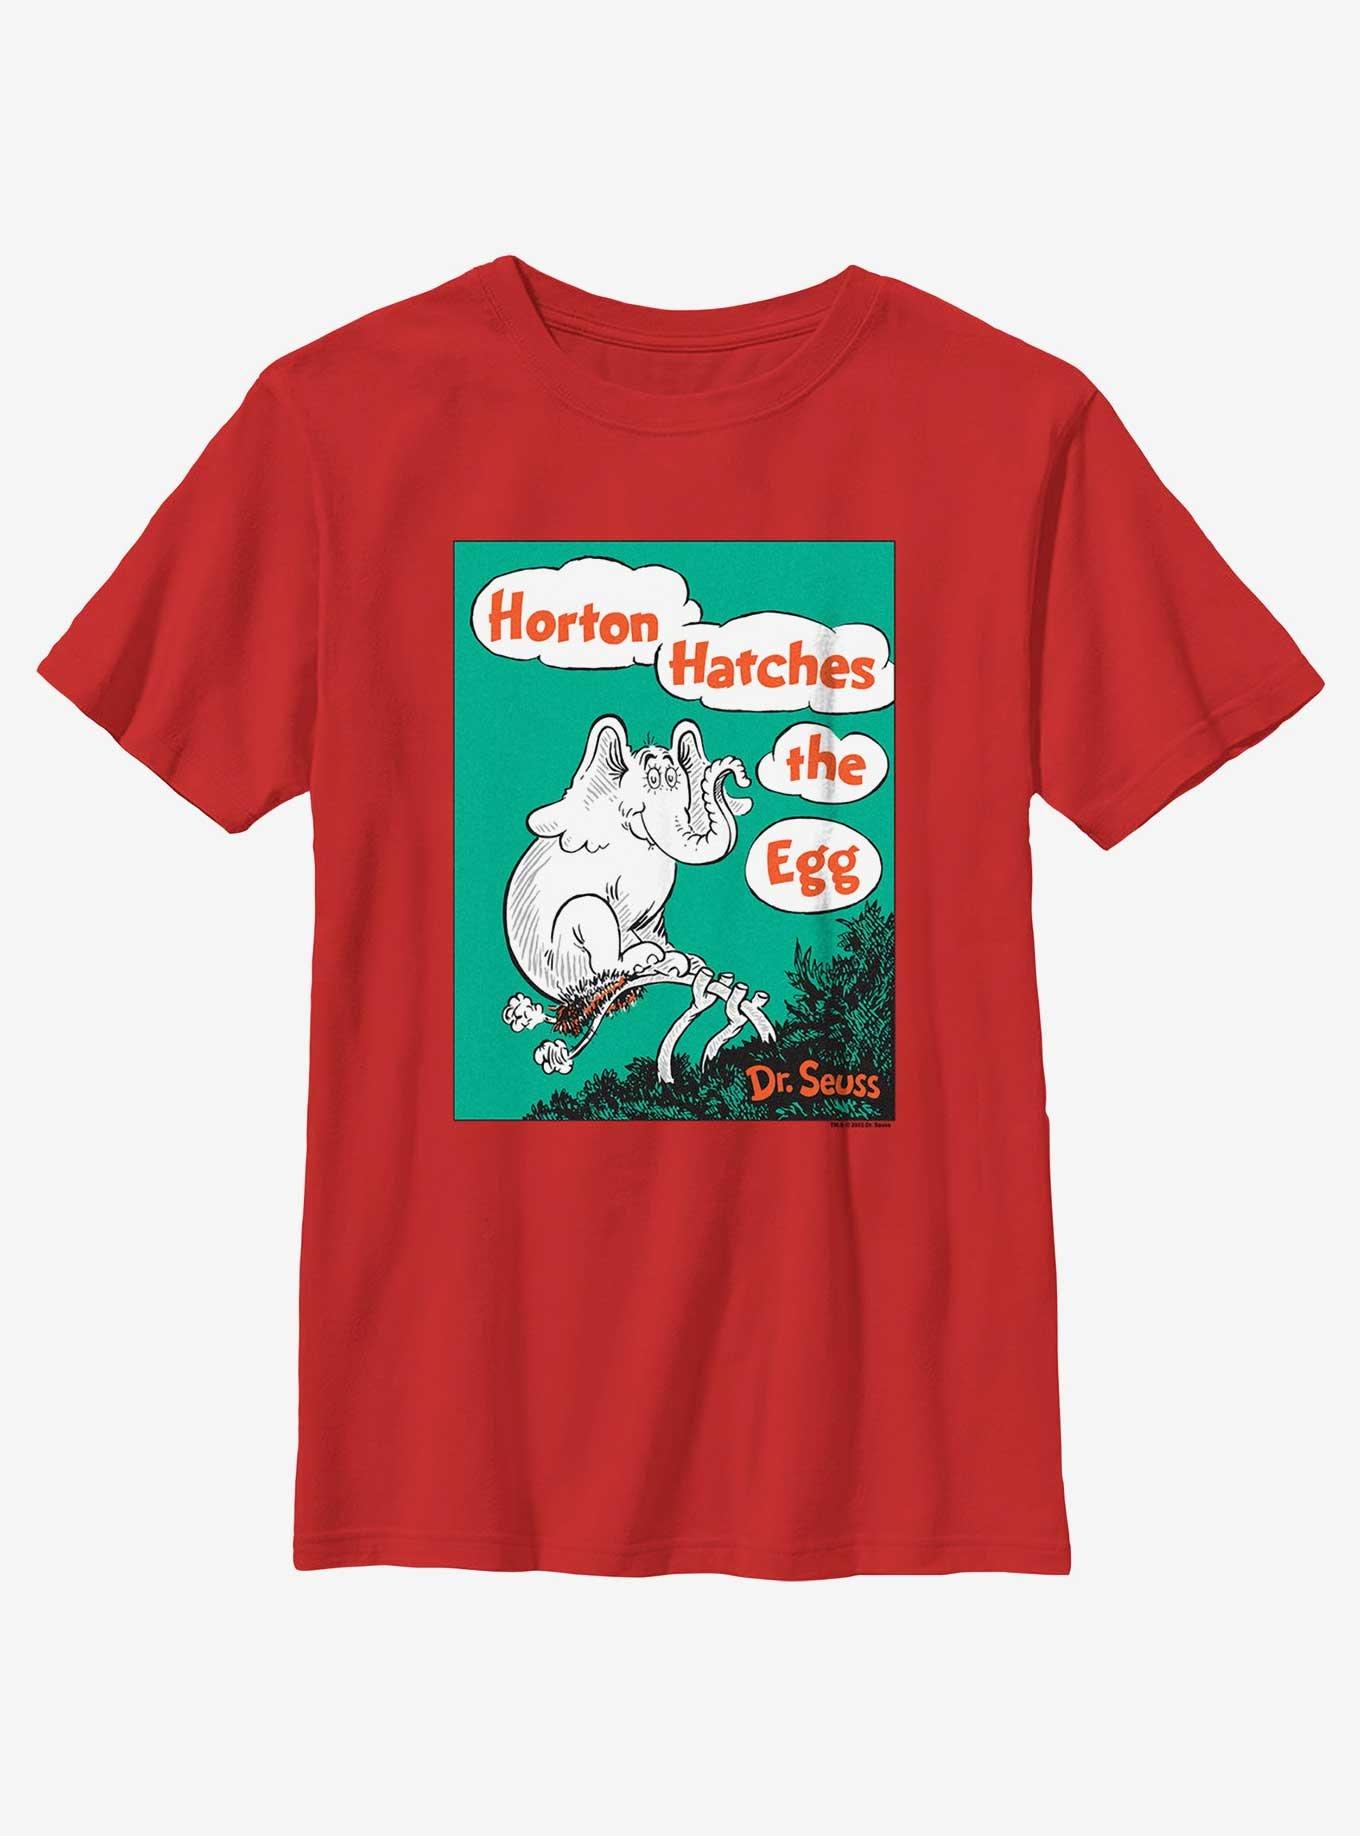 Dr. Seuss's Horton Hatches The Egg Cover Youth T-Shirt, RED, hi-res